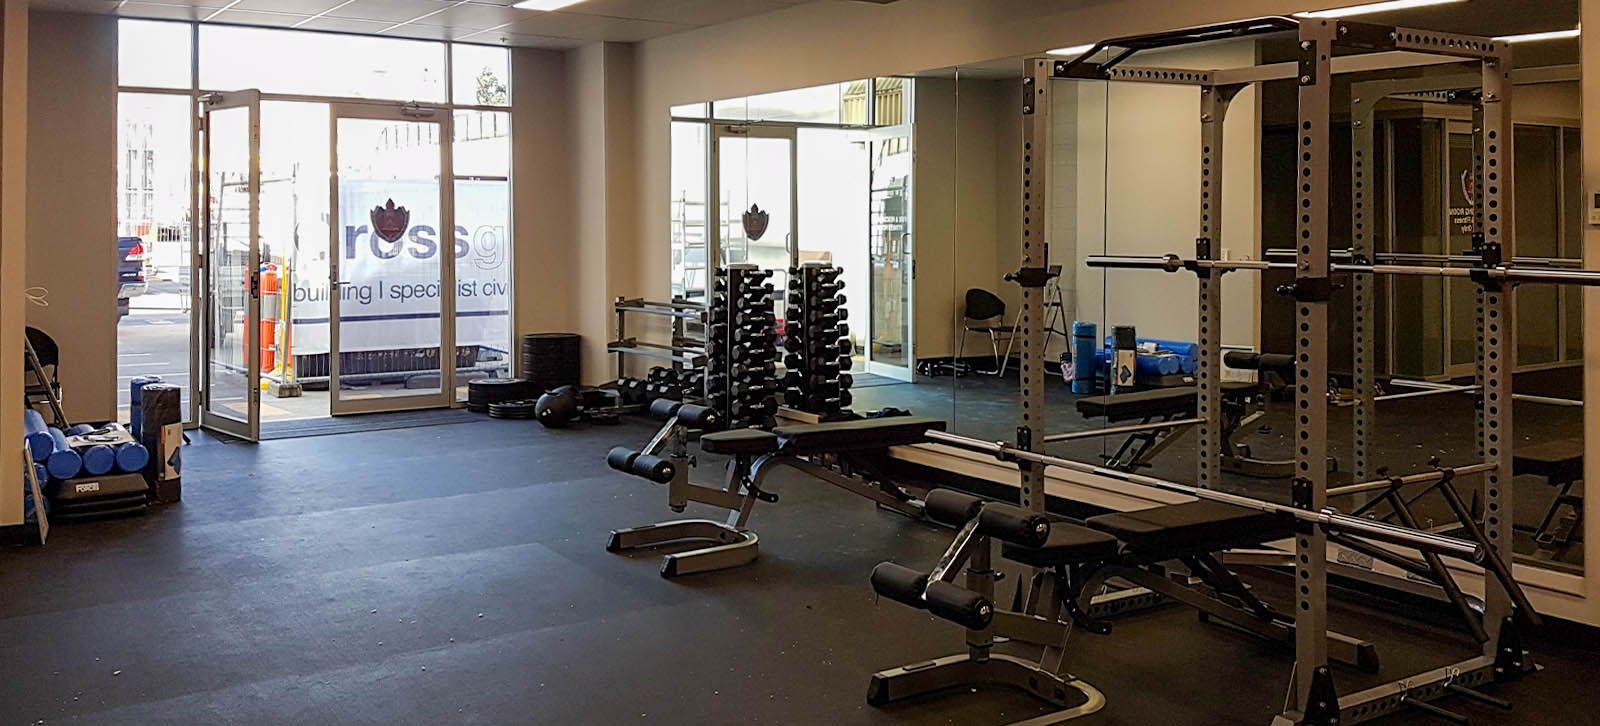 Fire Station Gym Fit Out equipped with versatile functional training gear for agility and flexibility